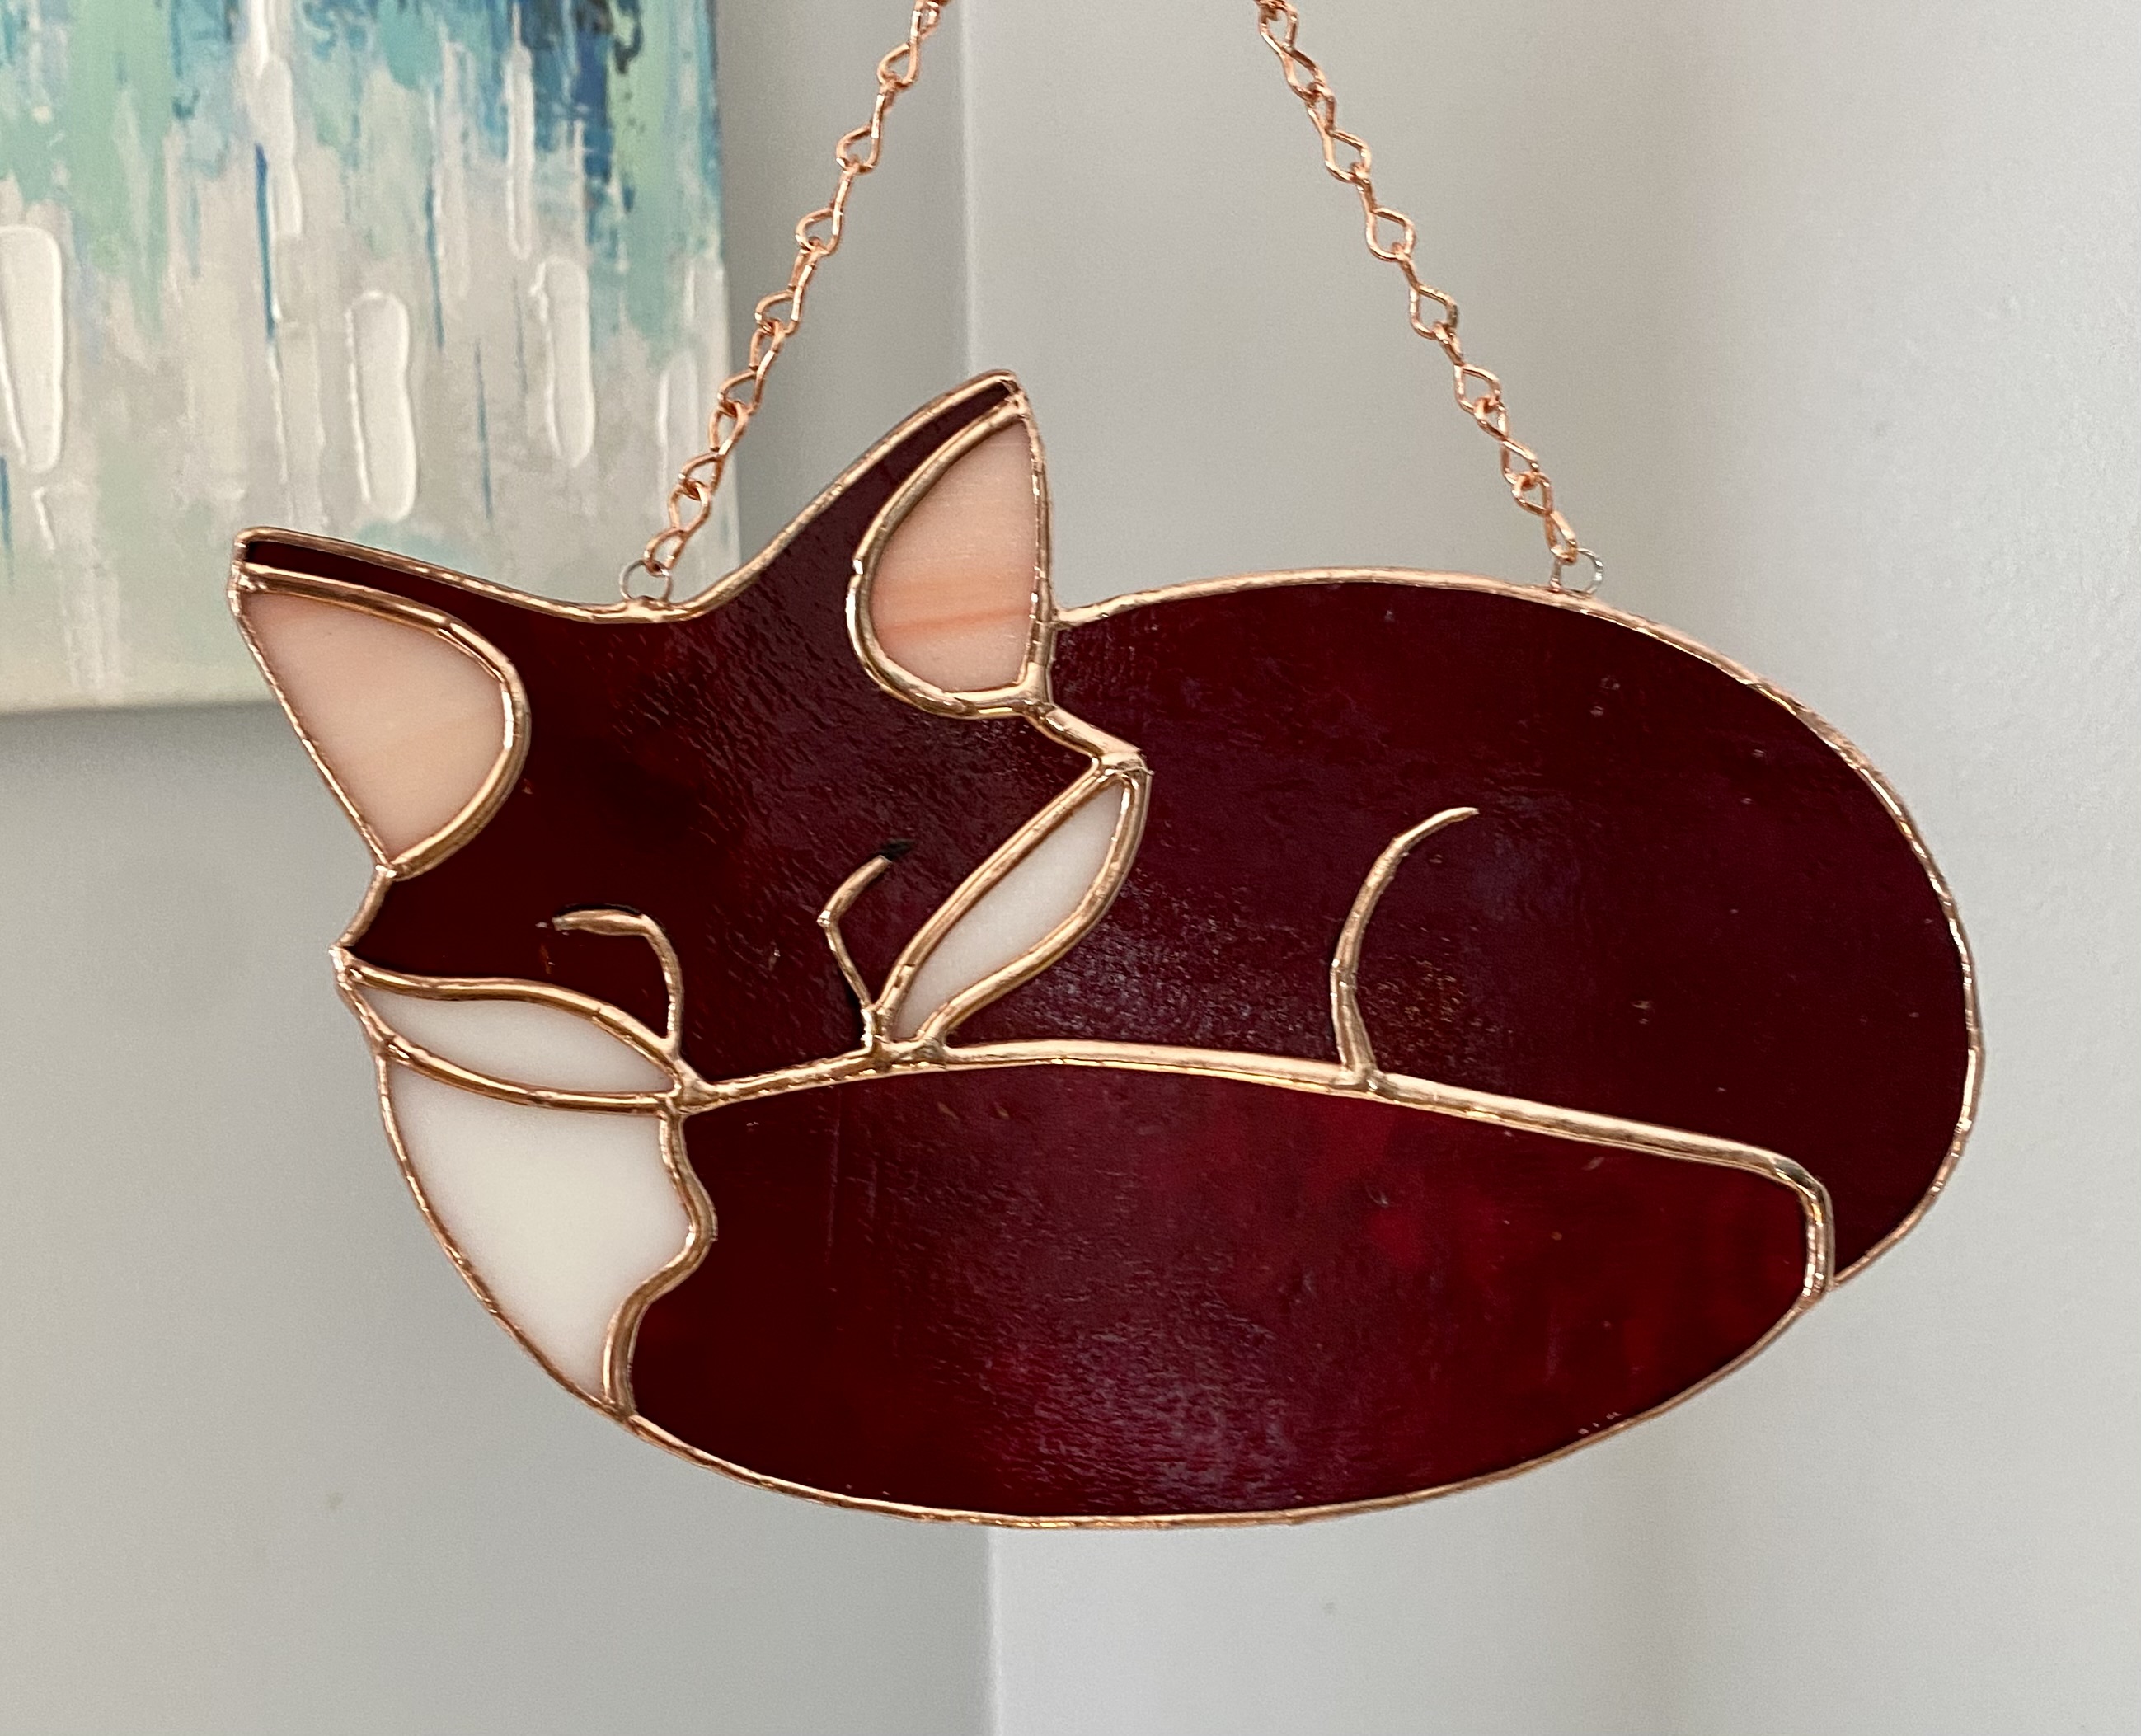 This Sleepy Fox is made with love by Uncaged Lioness Creations, LLC! Shop more unique gift ideas today with Spots Initiatives, the best way to support creators.